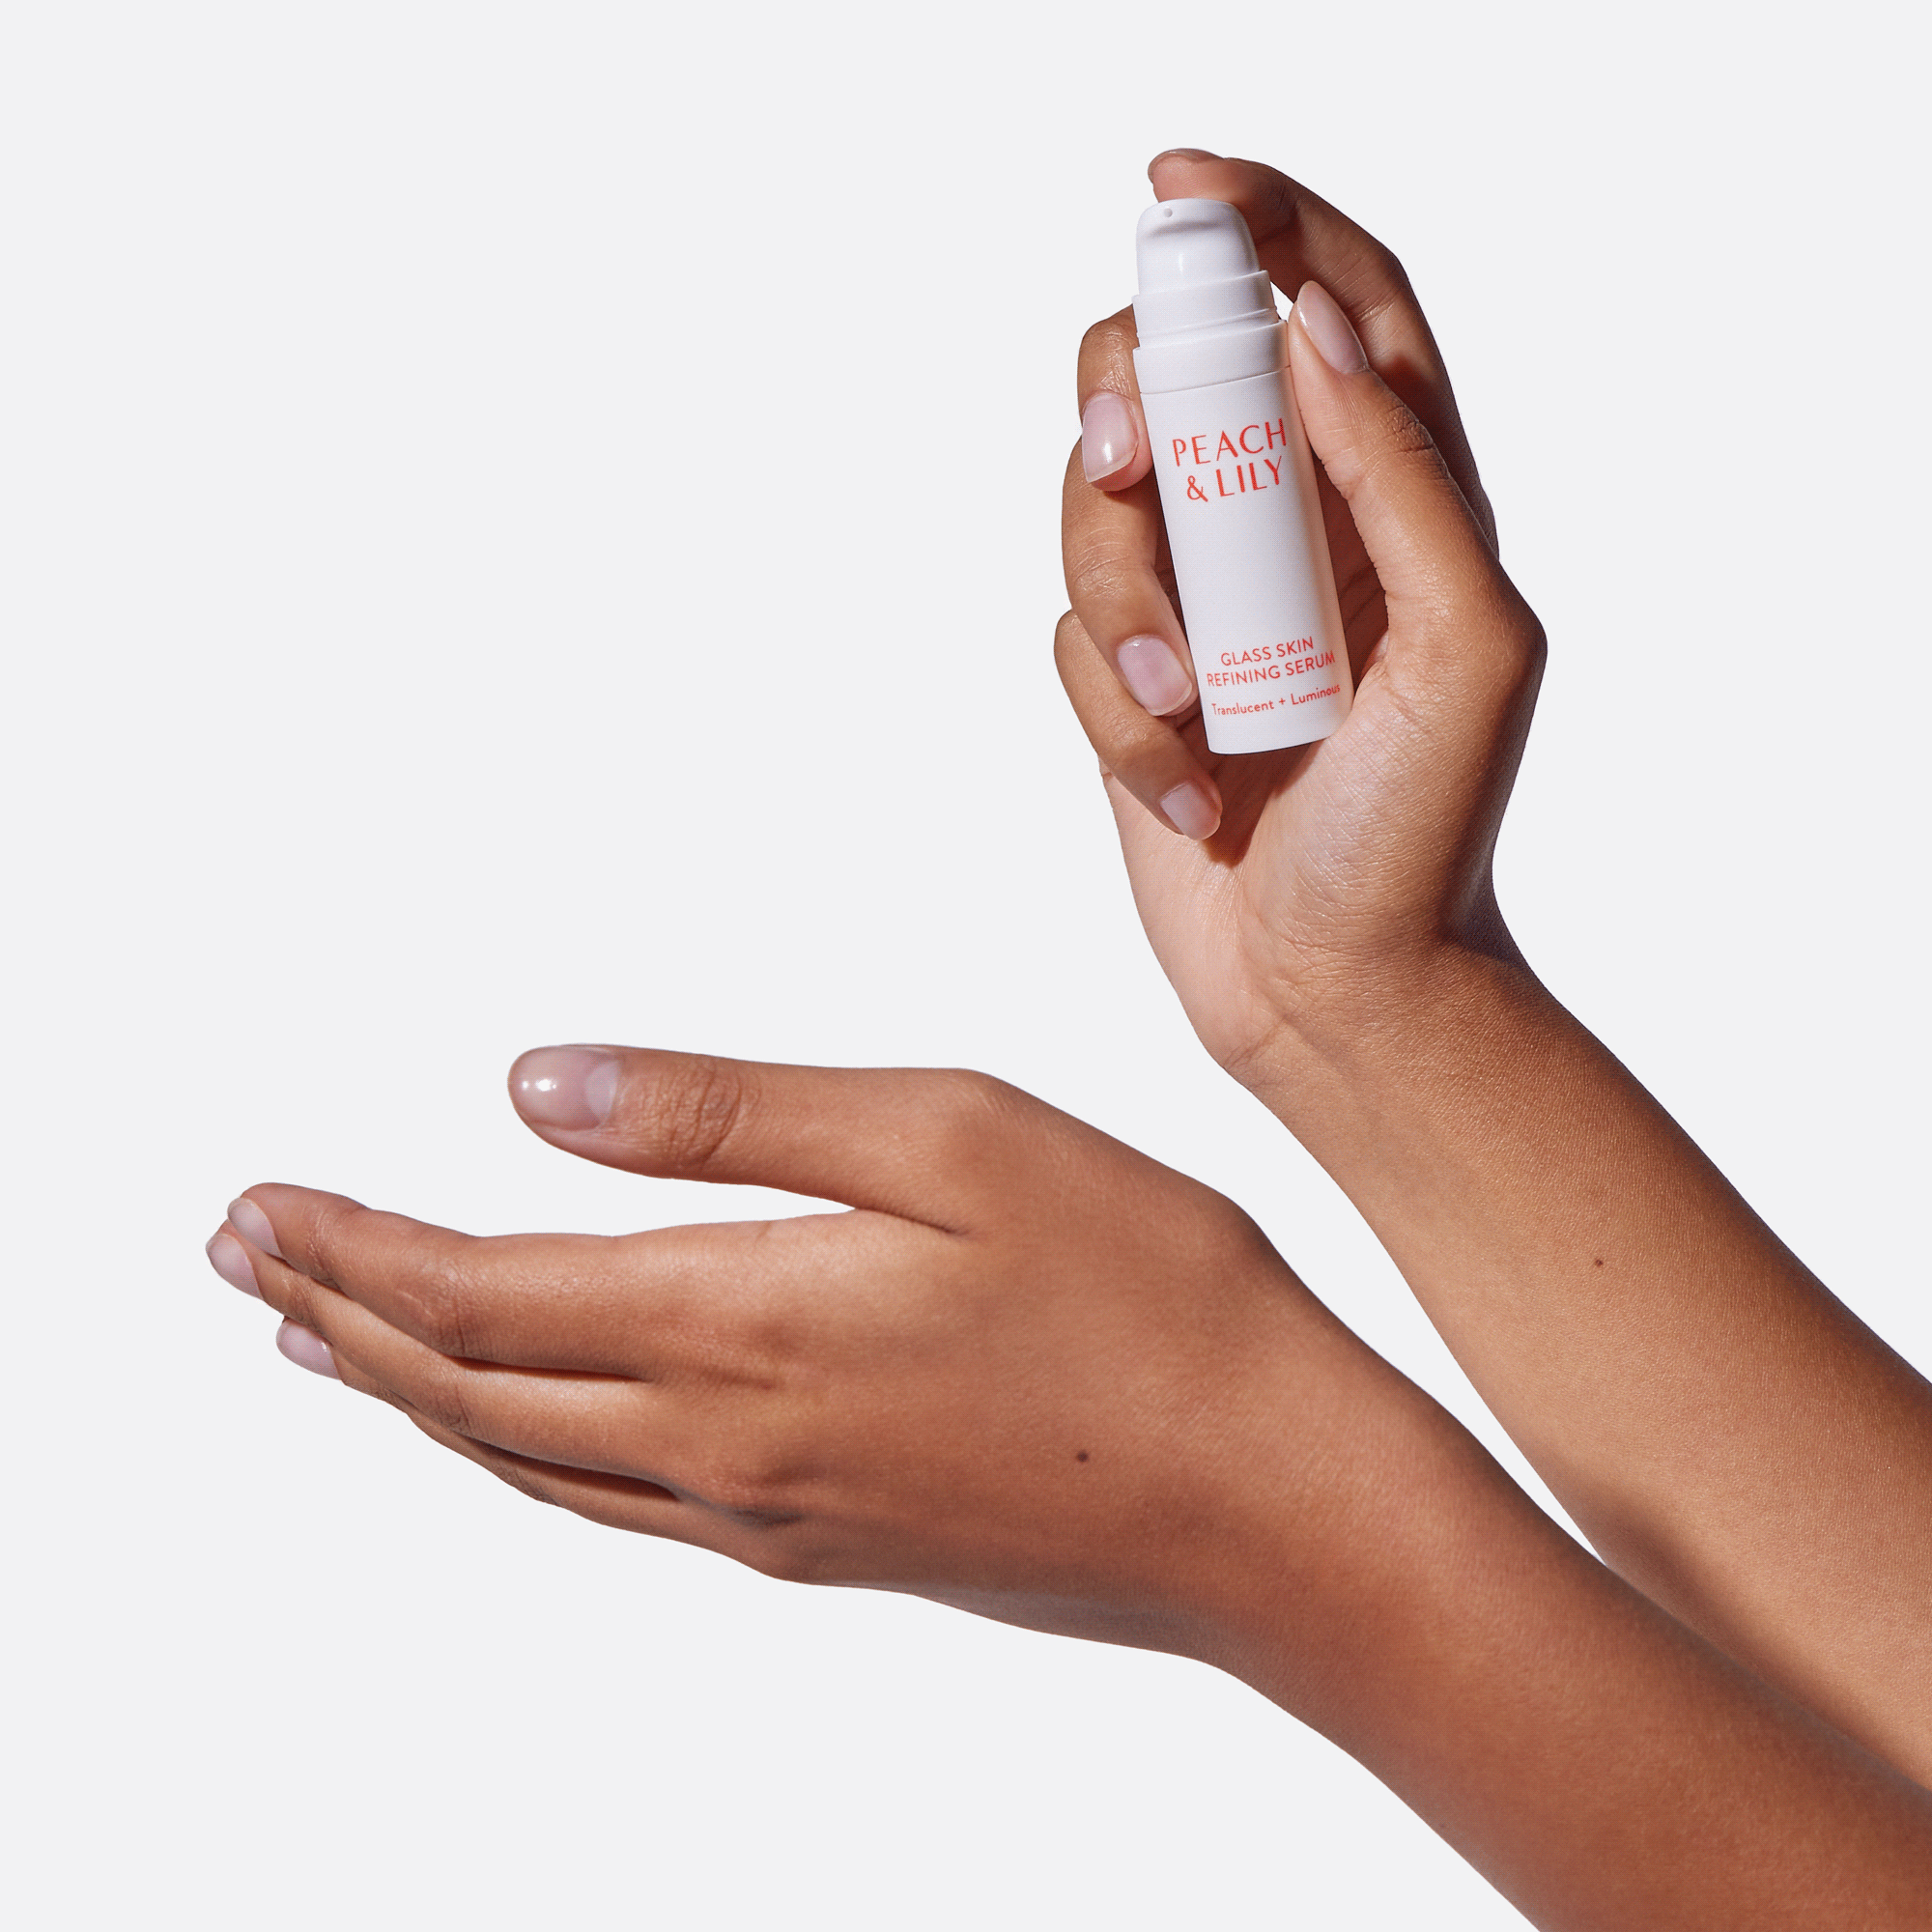 Someone uses a pump of the Peach & Lily Travel Size Glass Skin Refining Serum on their hand, showing how the pump bottle easily fits in their hand and the product is easy to spread across the skin